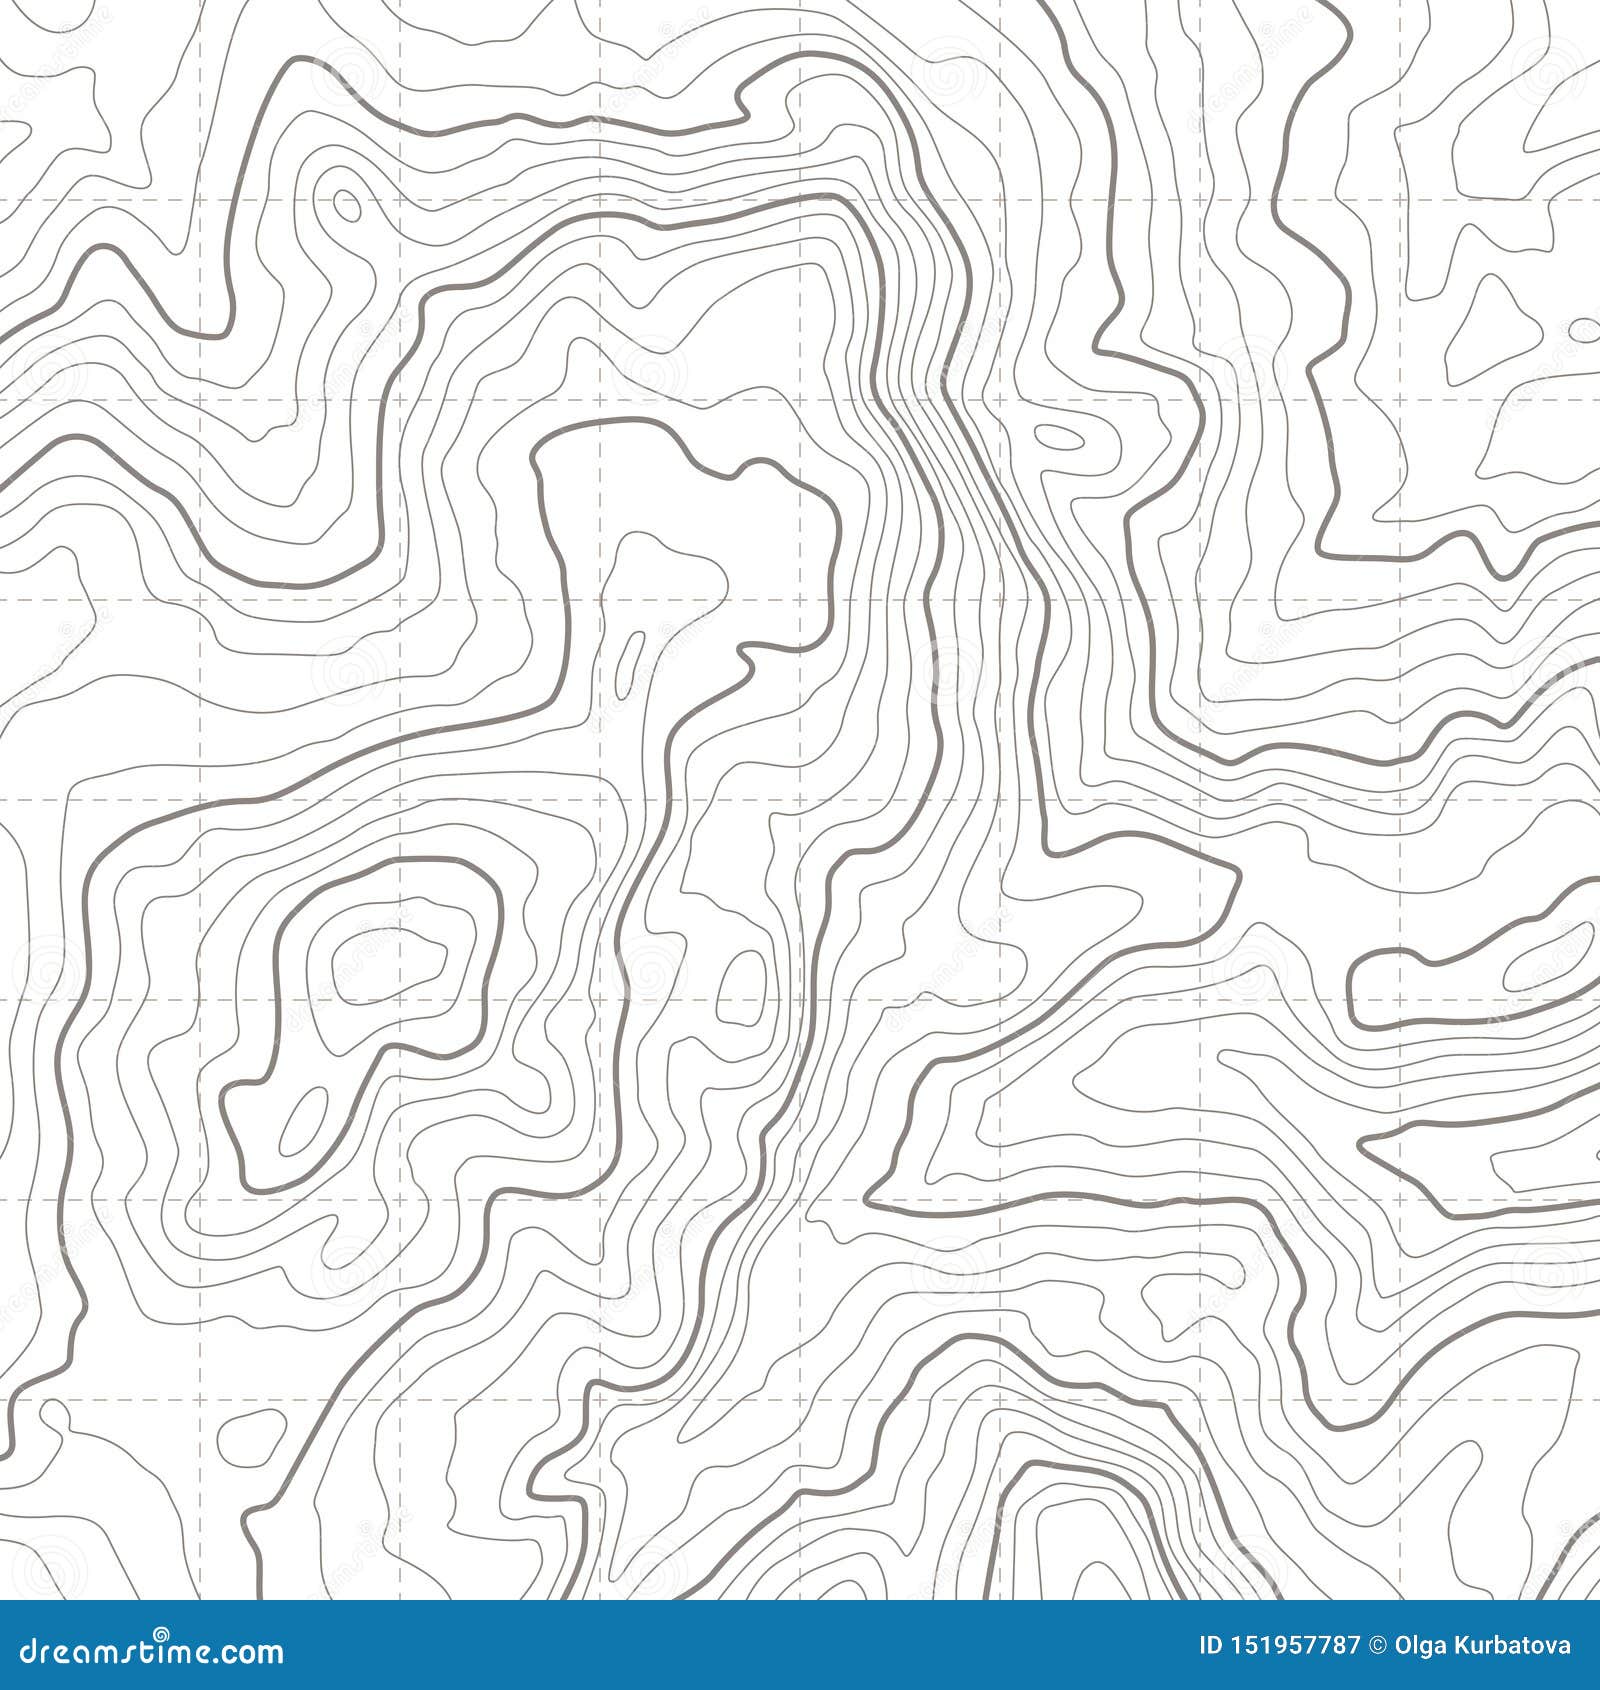 topographic map. geographical location lines, cartography contour line nature trails relief texture image. mapping grid